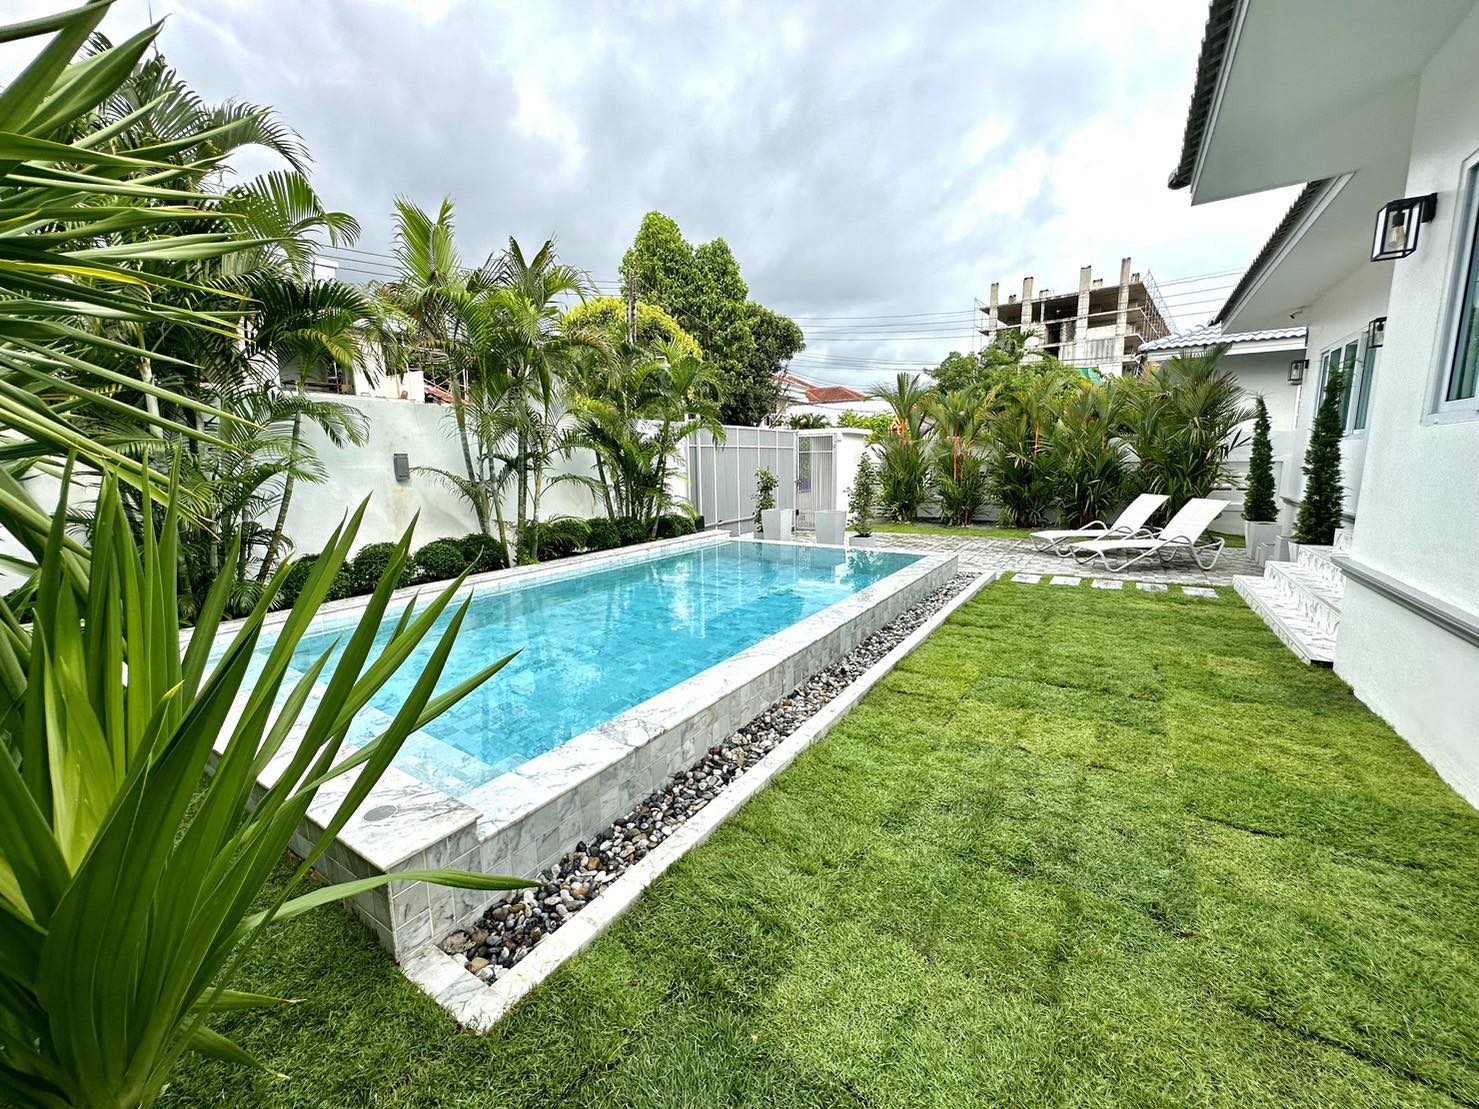 View point Villa Jomtien. Pool House with 4 bedrooms in Jomtien with 1 maid's room